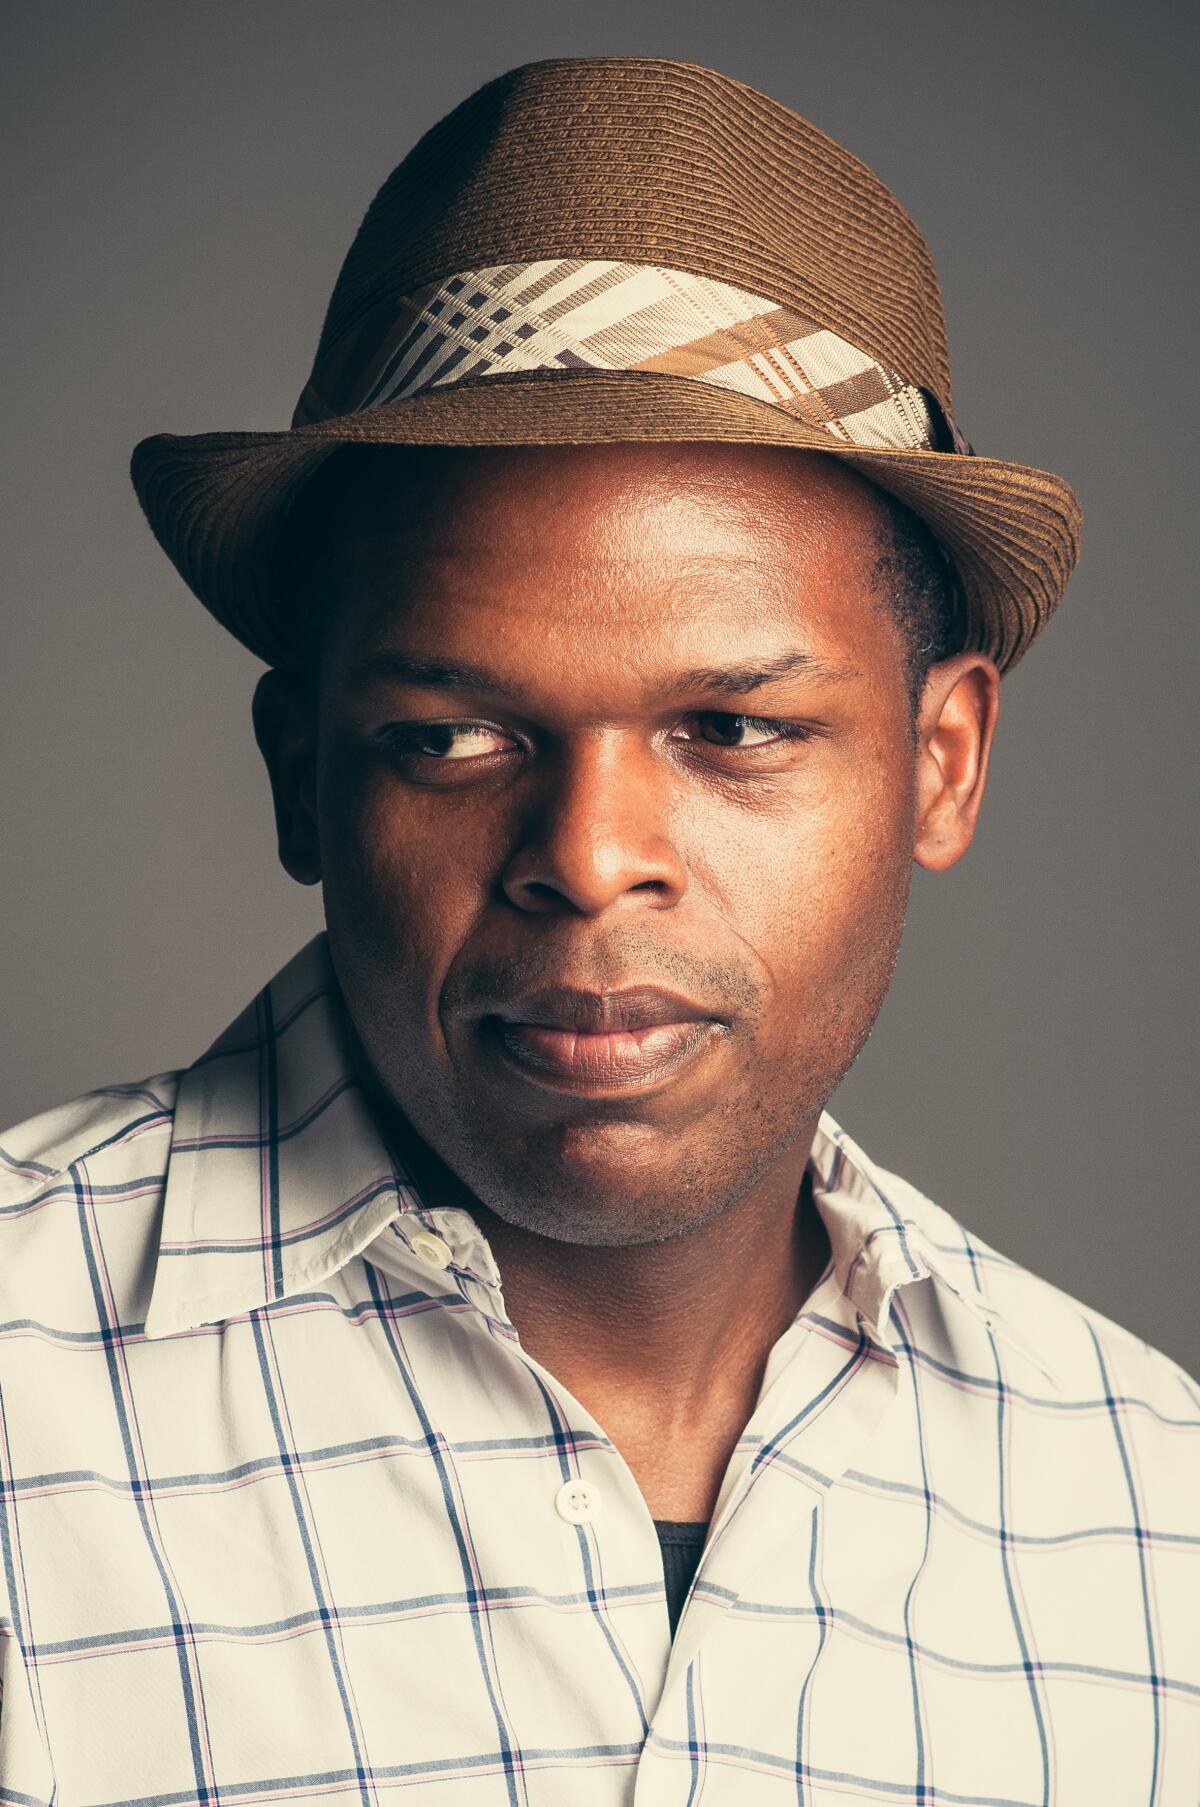 Maurice Carlos Ruffin, wearing a checked shirt and a brown hat.